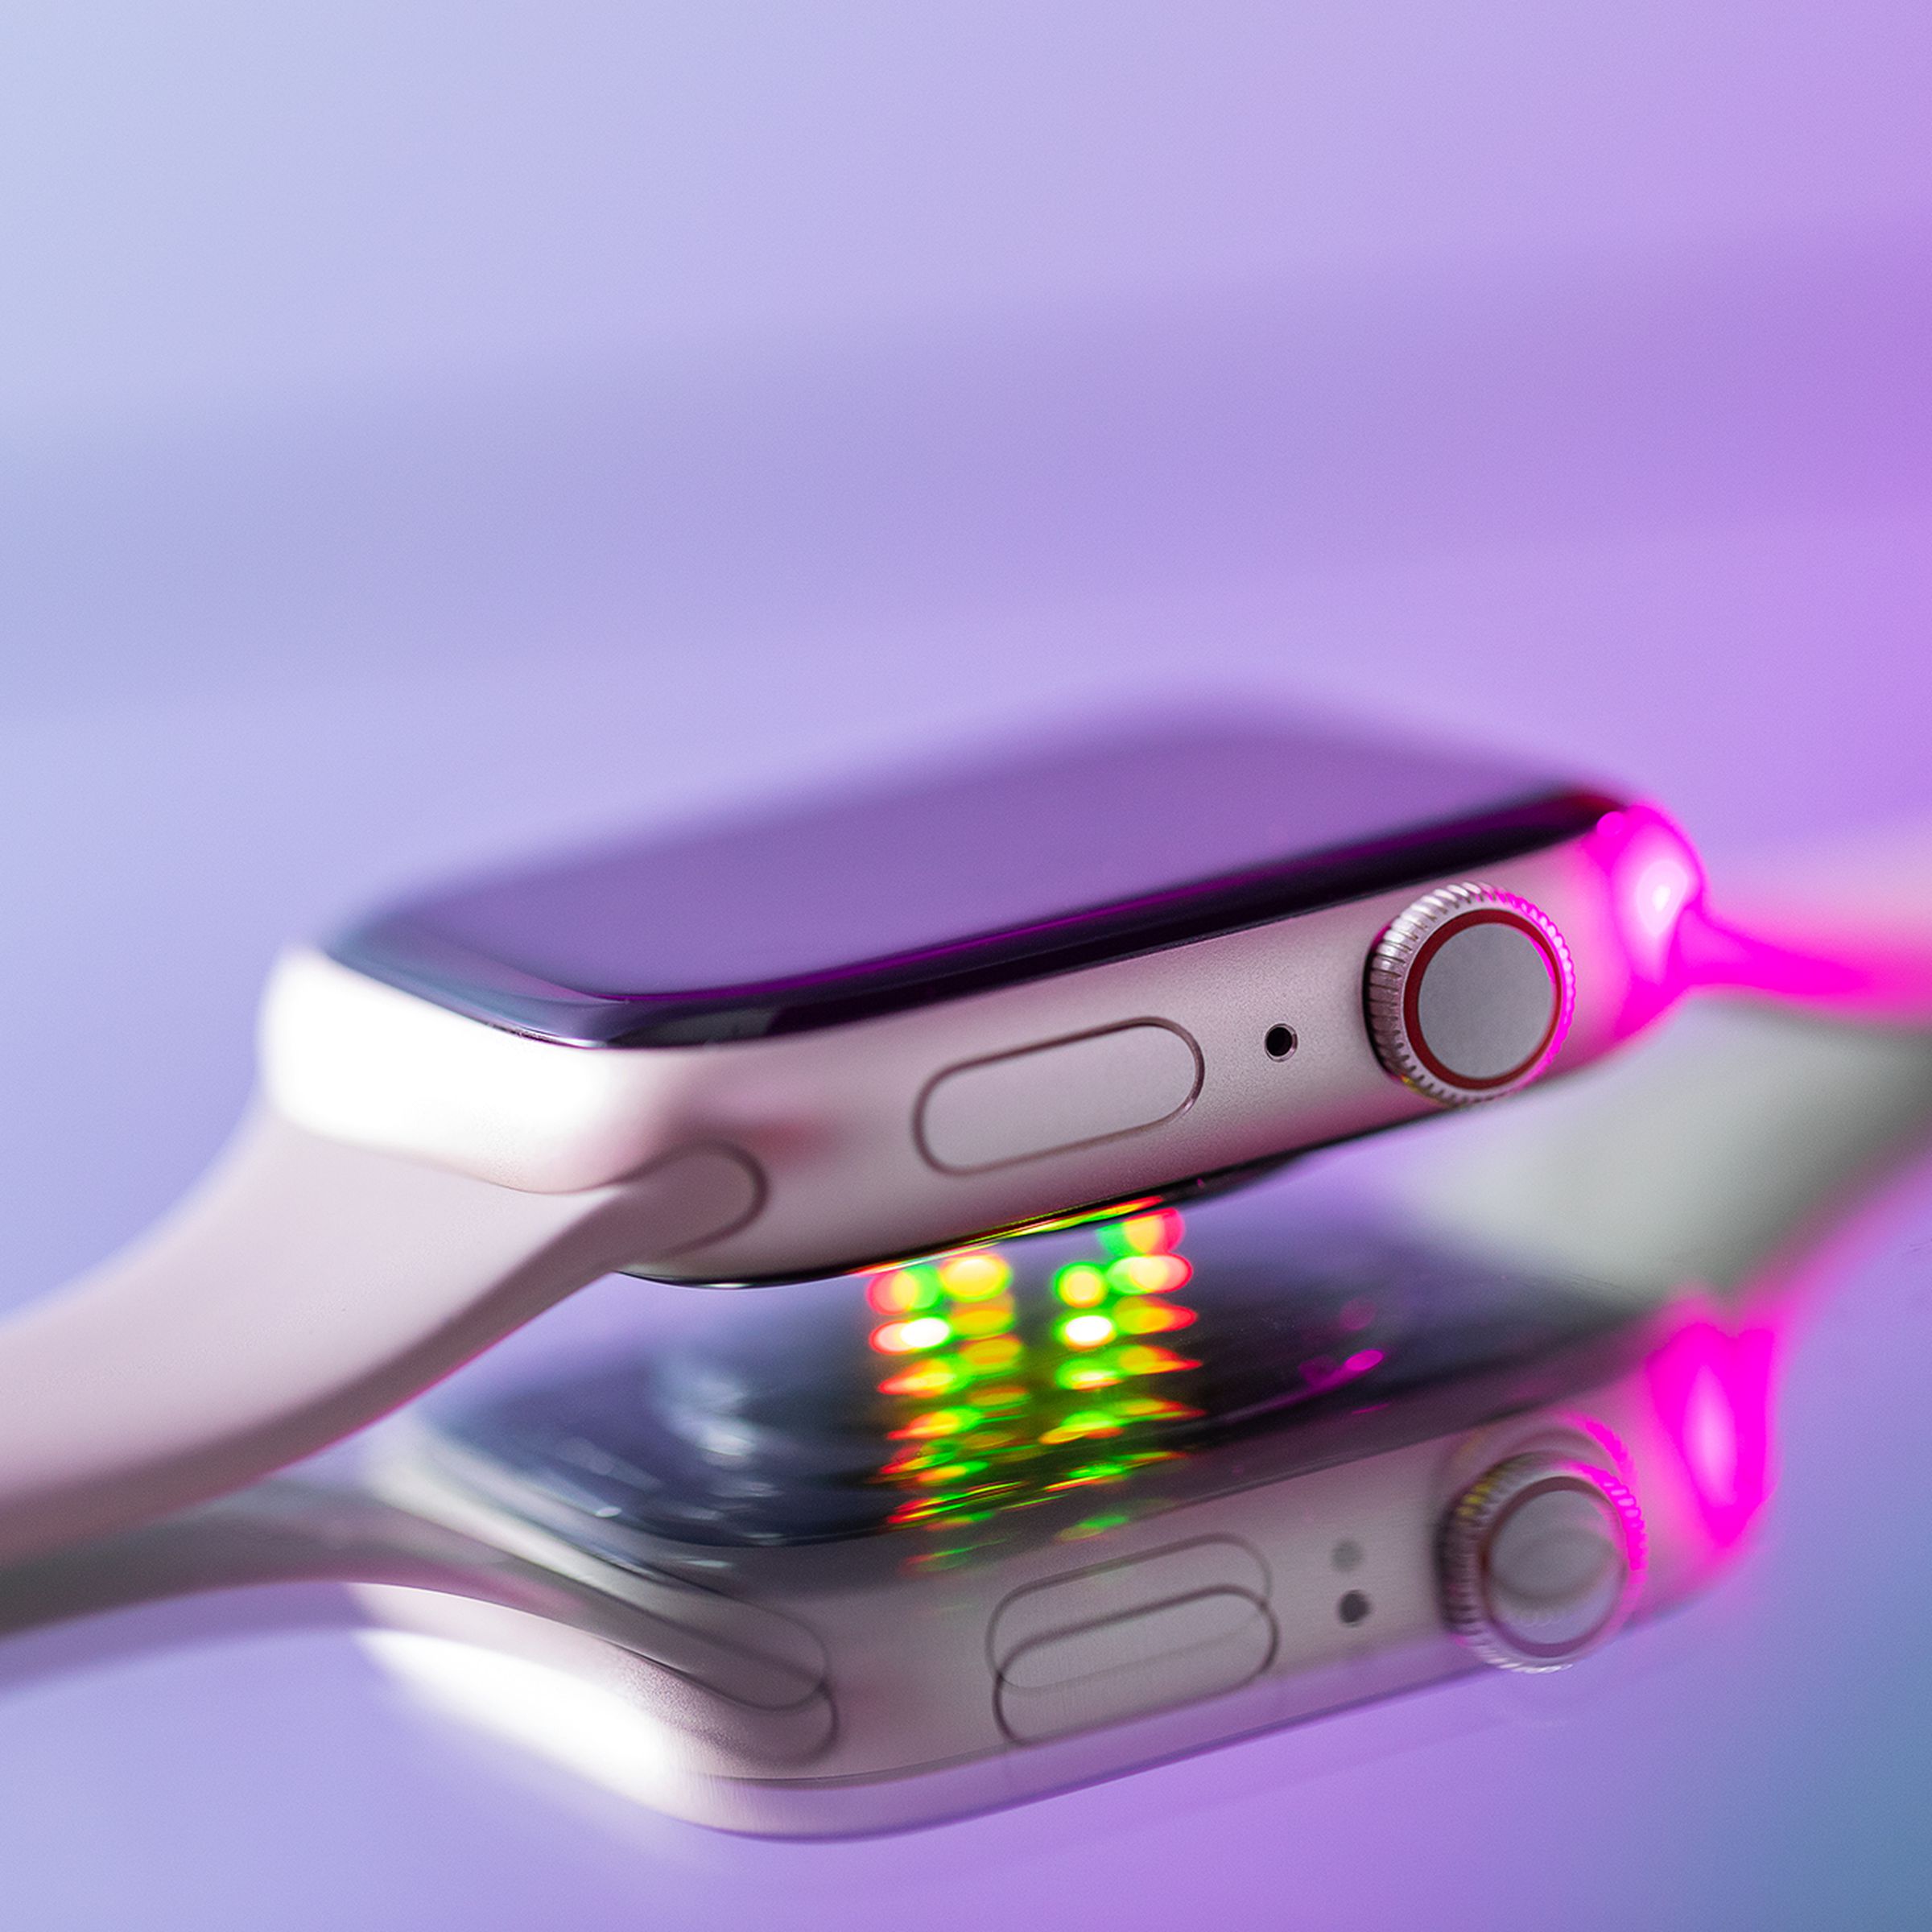 The Apple watch Series 8 with sensor array lit up